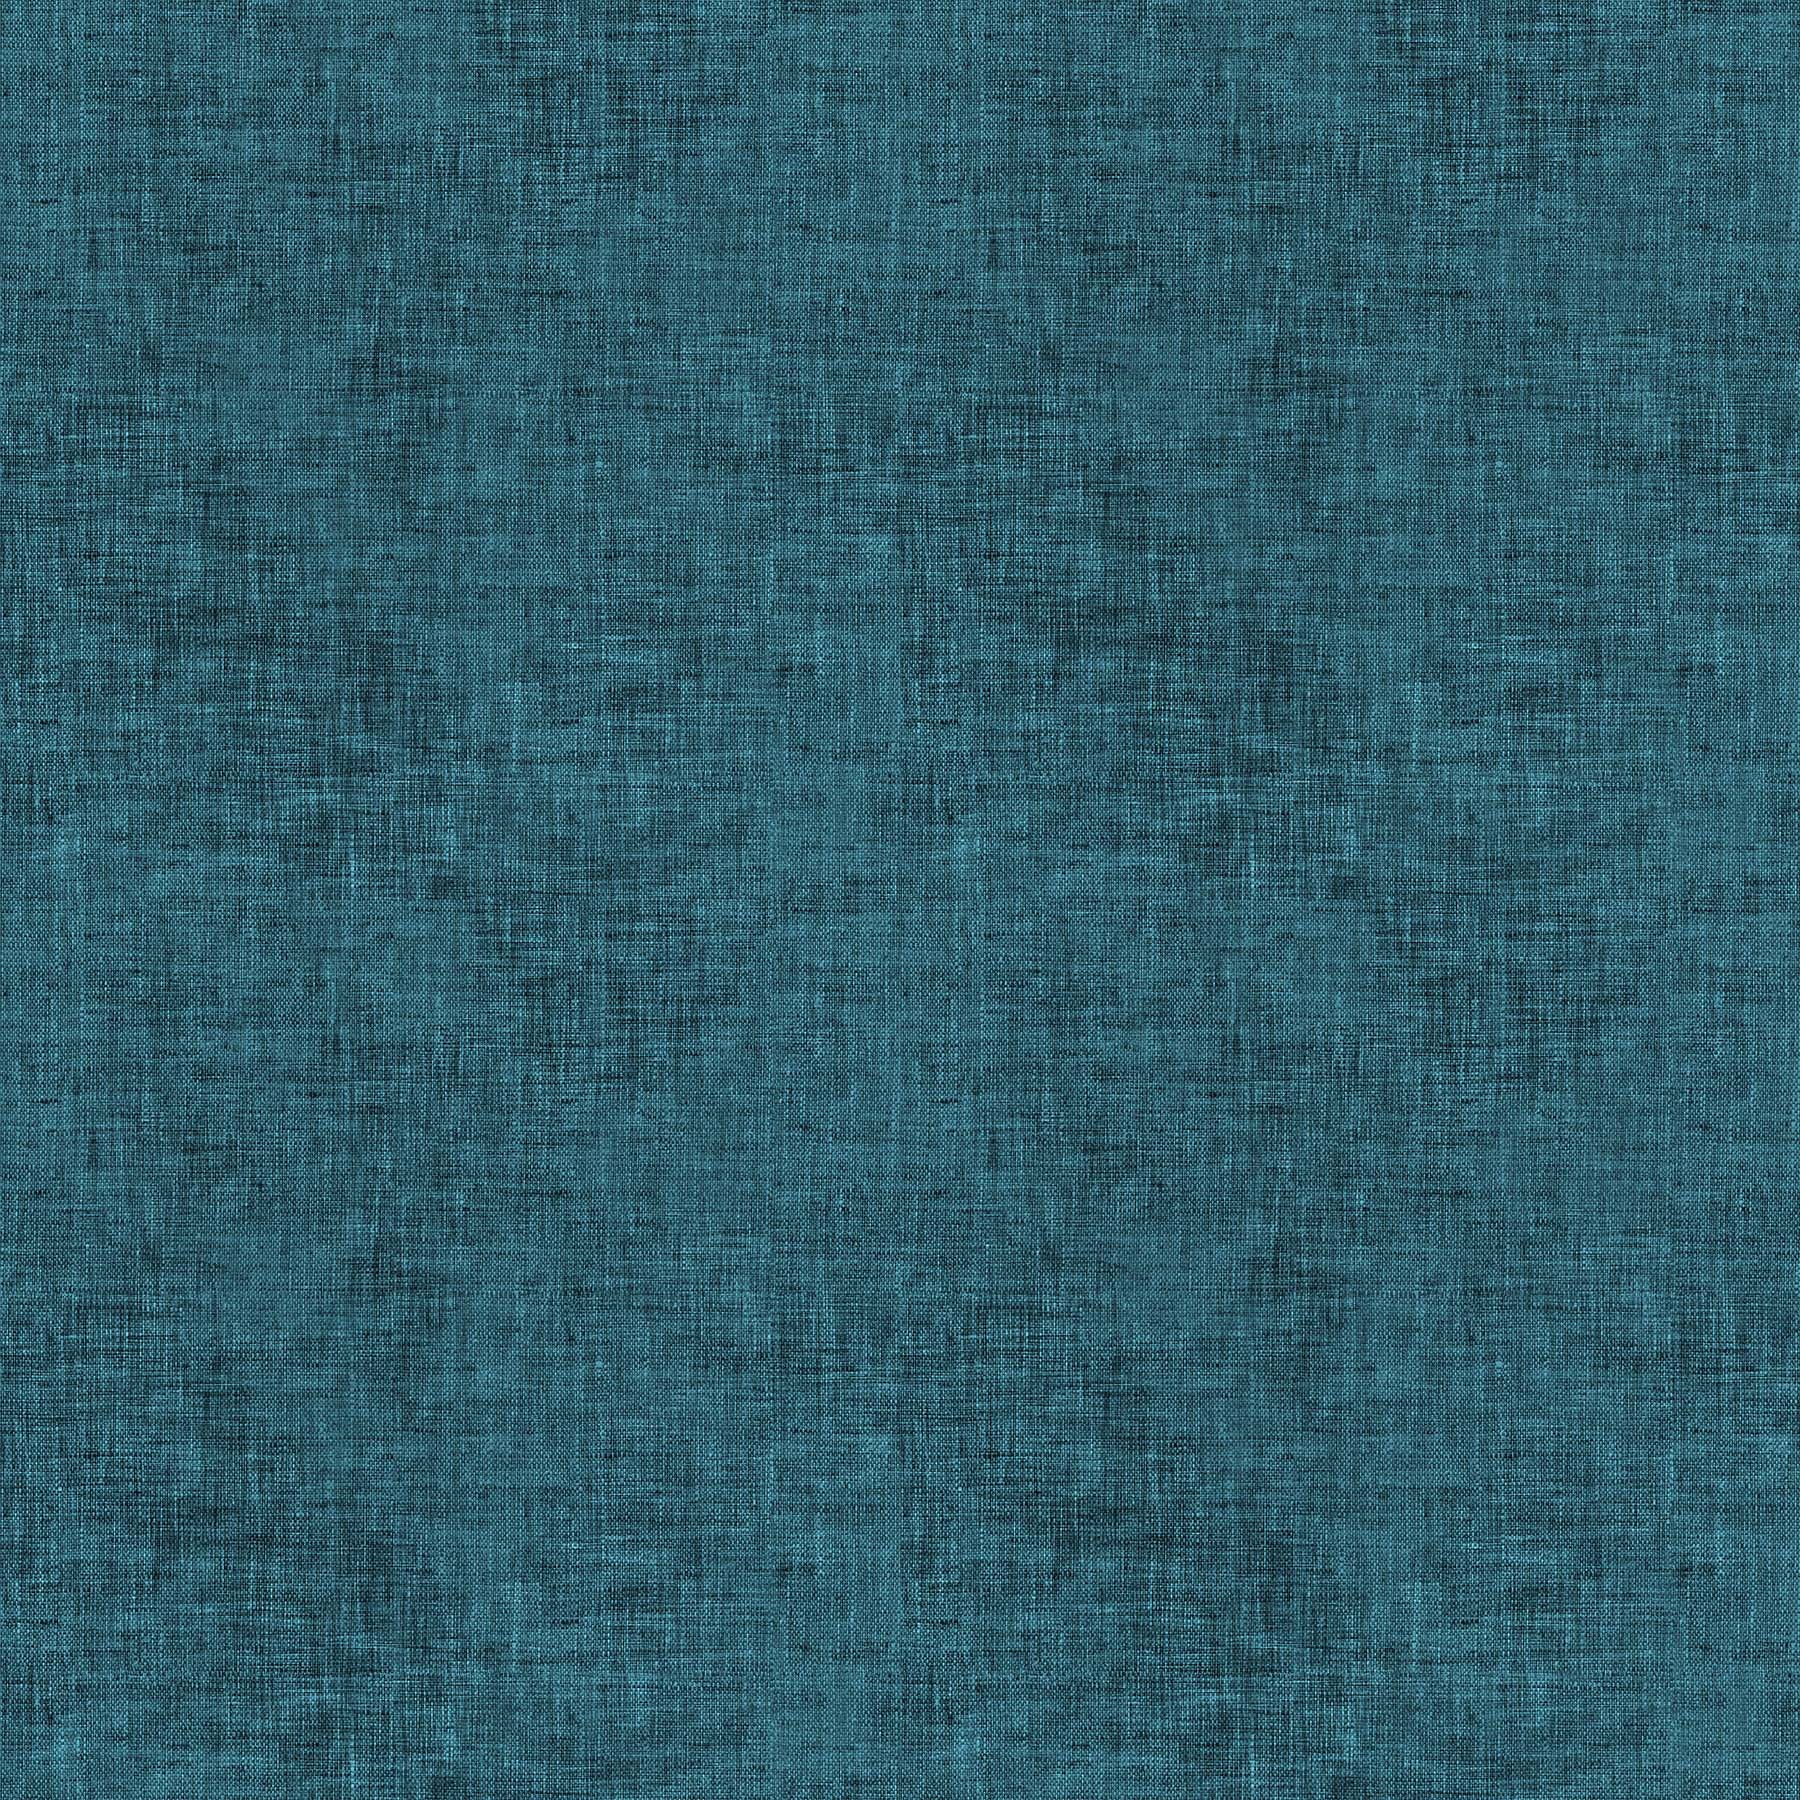 LINEN LOOK WEAVE - TEAL  FOREST FABLE FIGO FABRICS